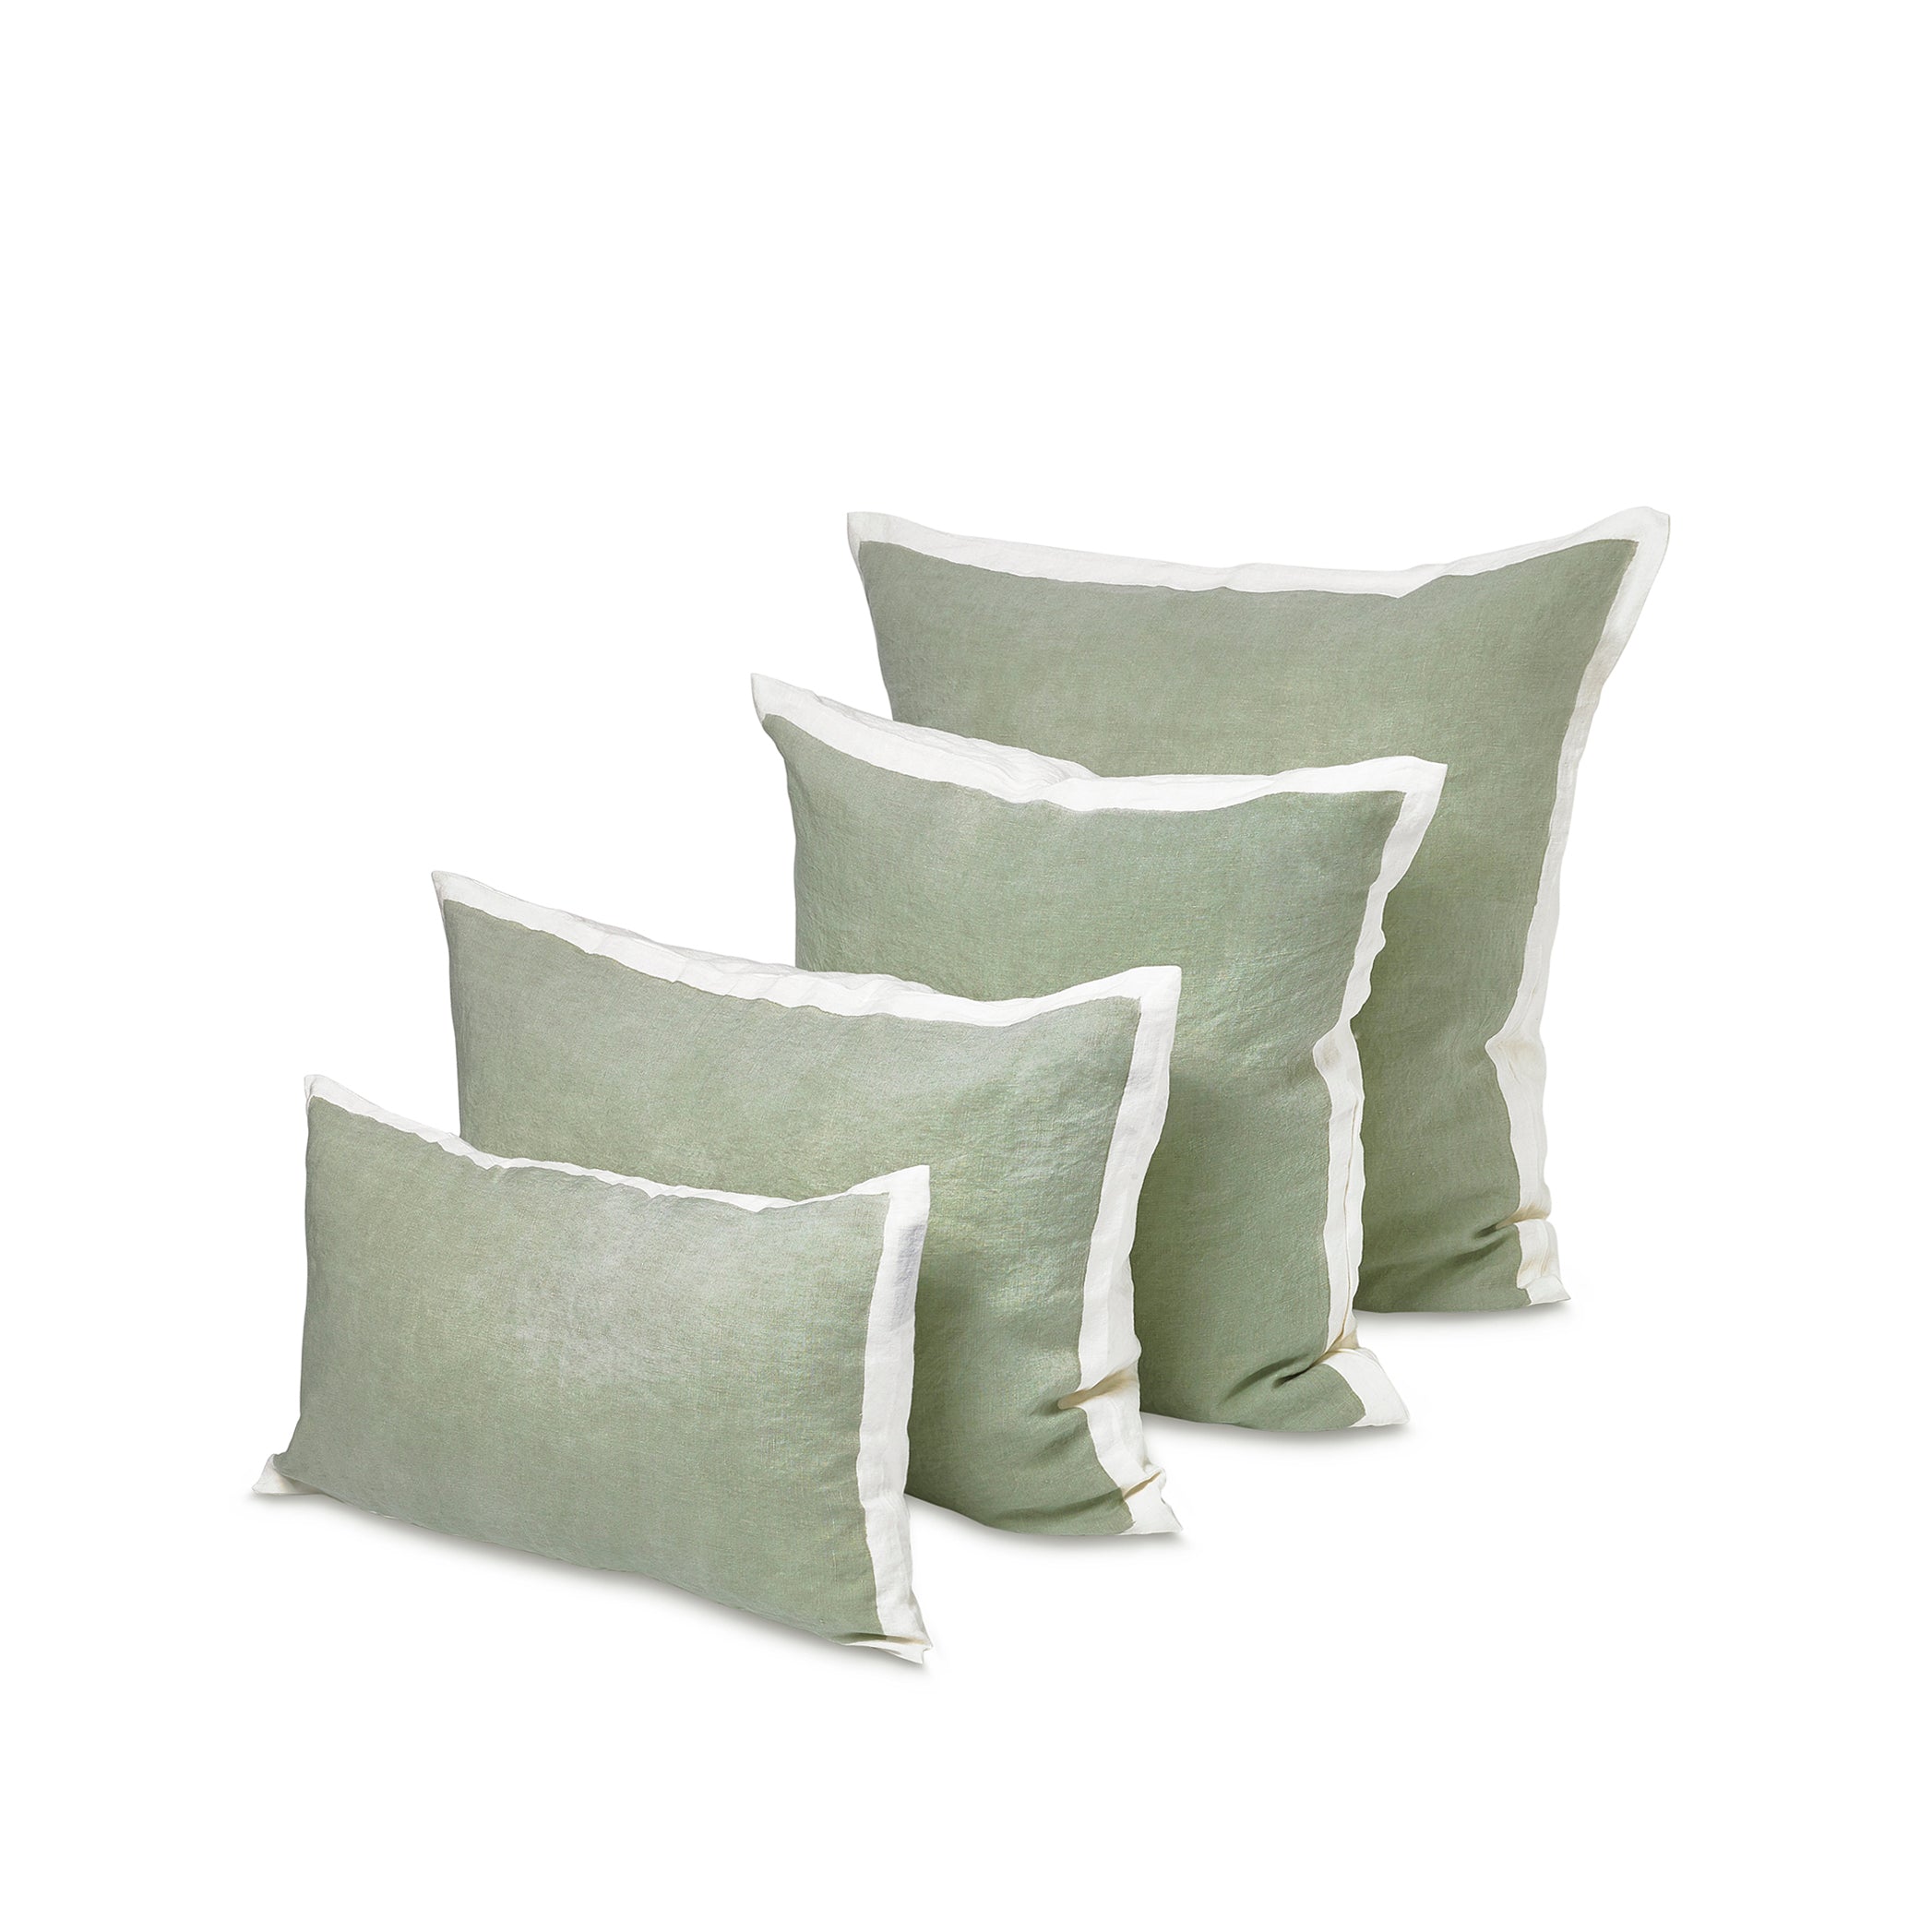 Hand Painted Linen Cushion in Pale Green, 50cm x 50cm